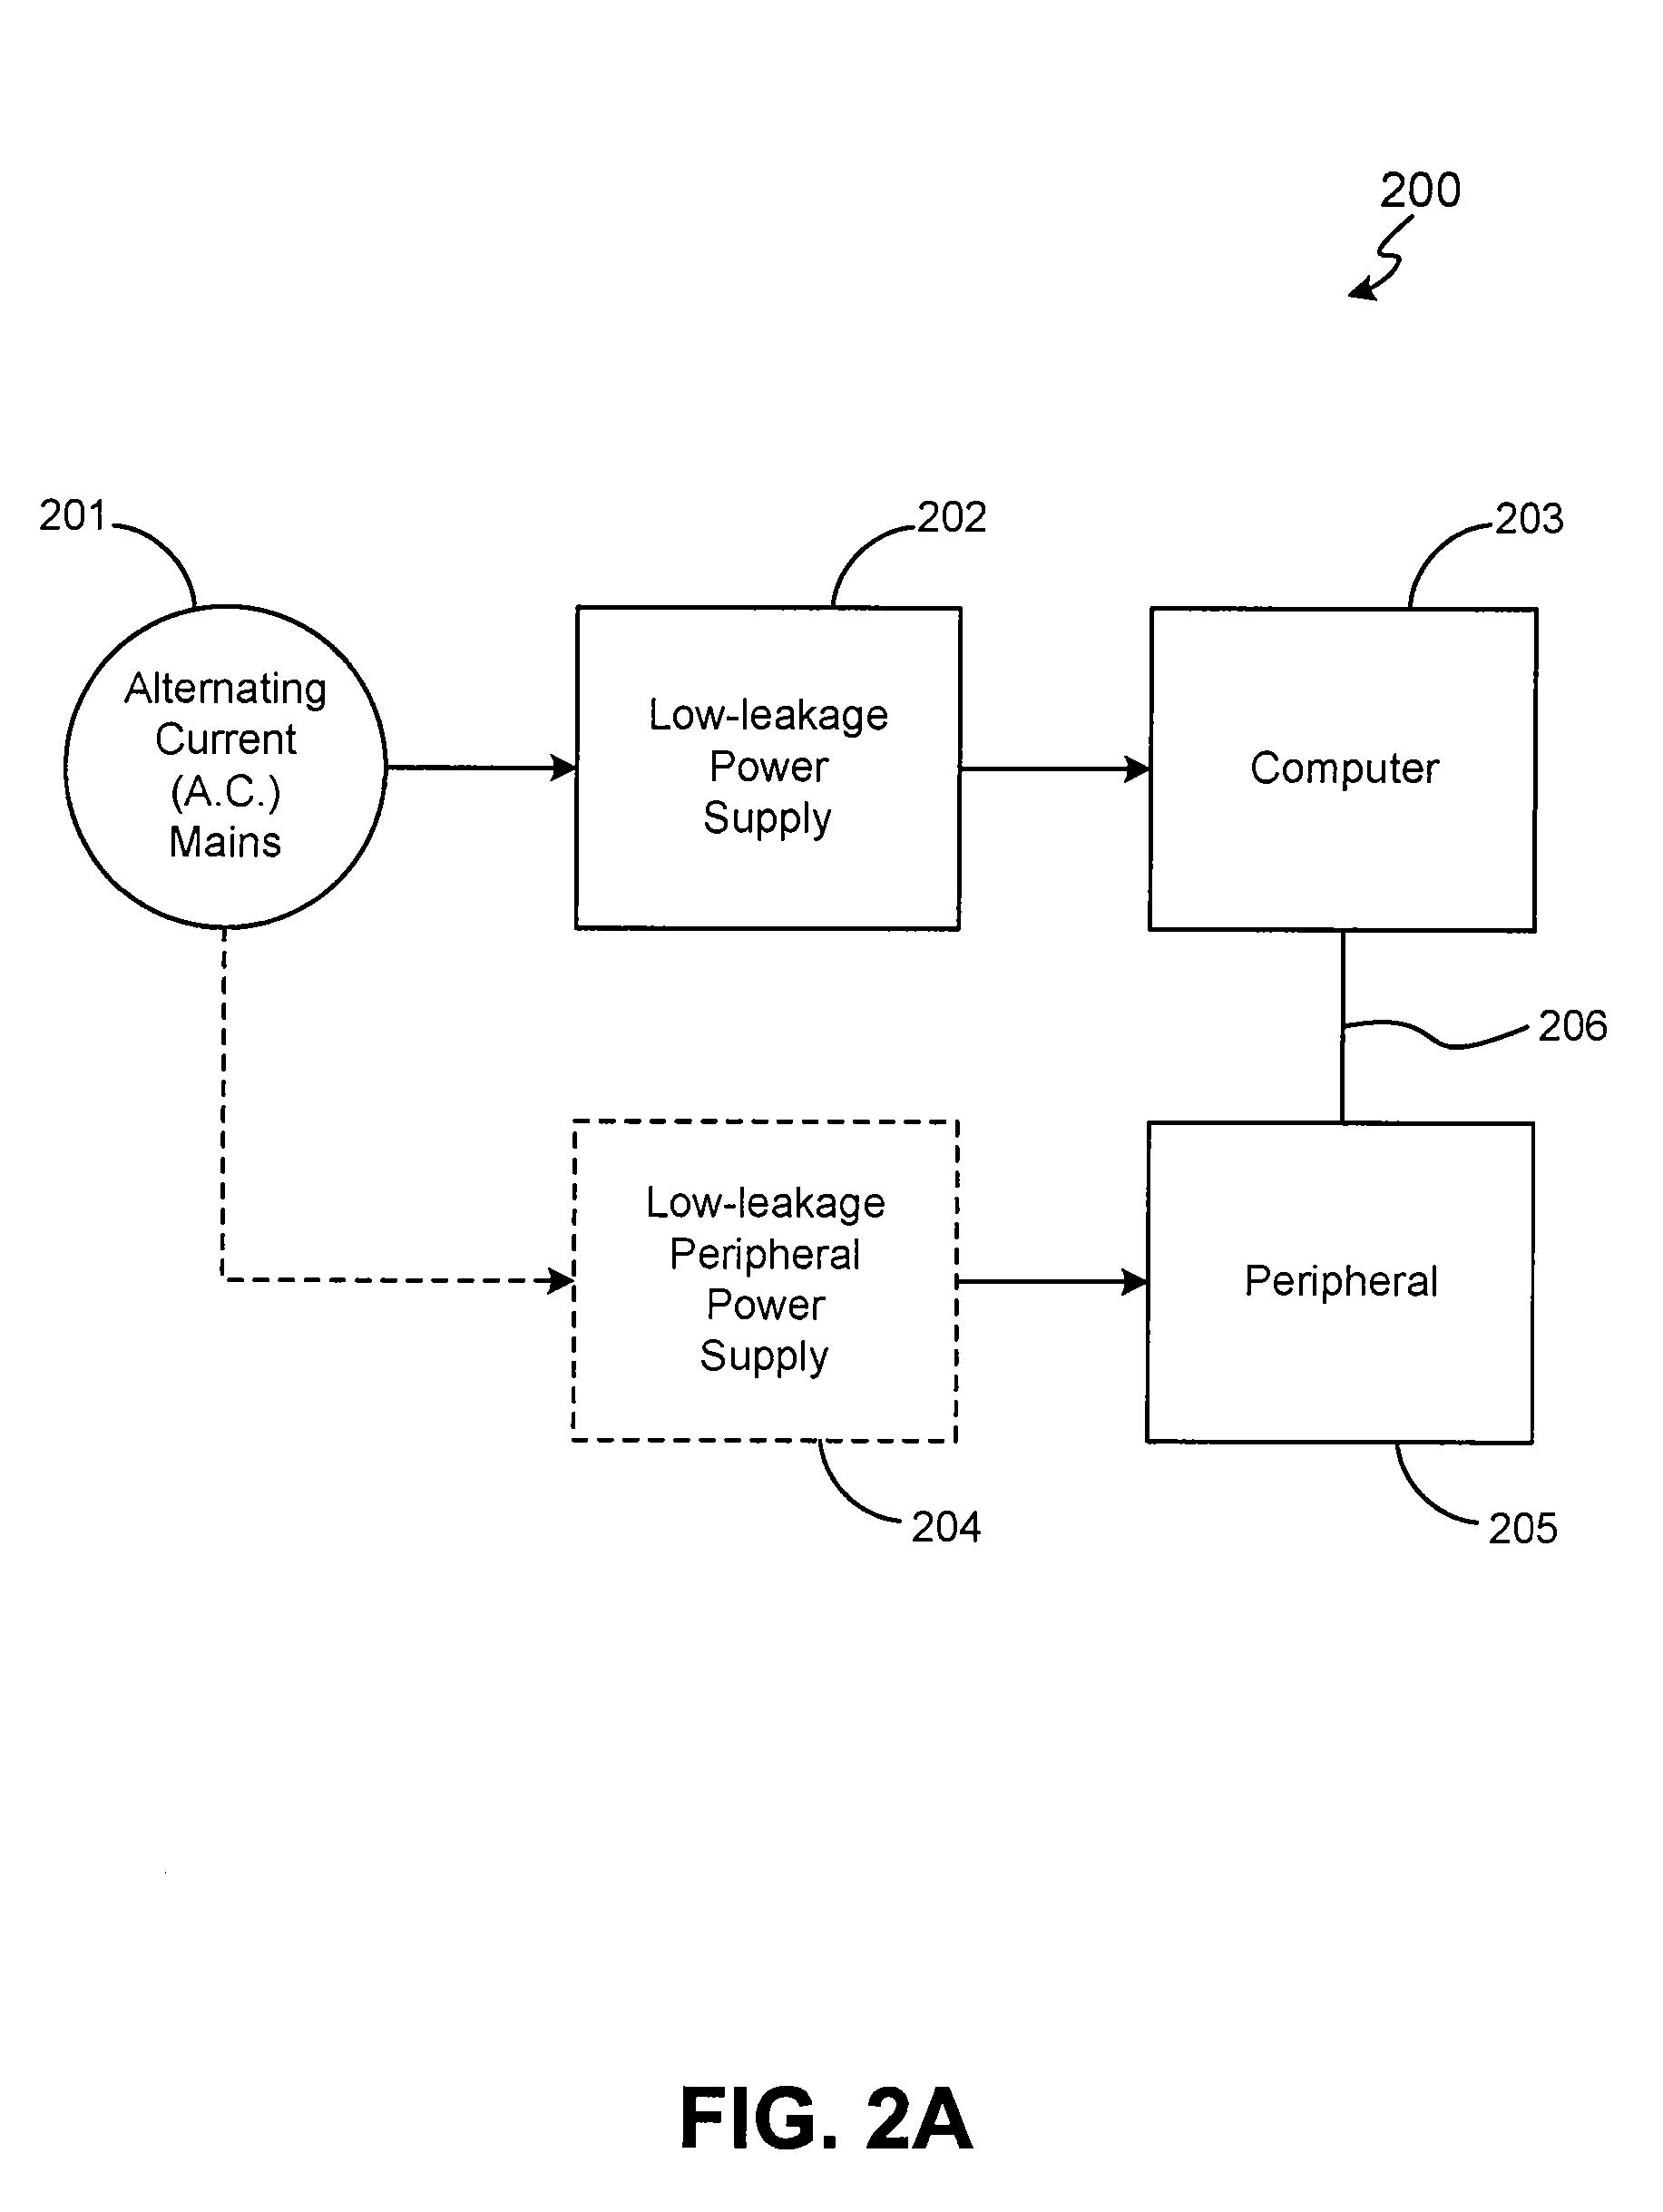 Method and system for enhancing safety with medical peripheral device by monitoring if host computer is AC powered